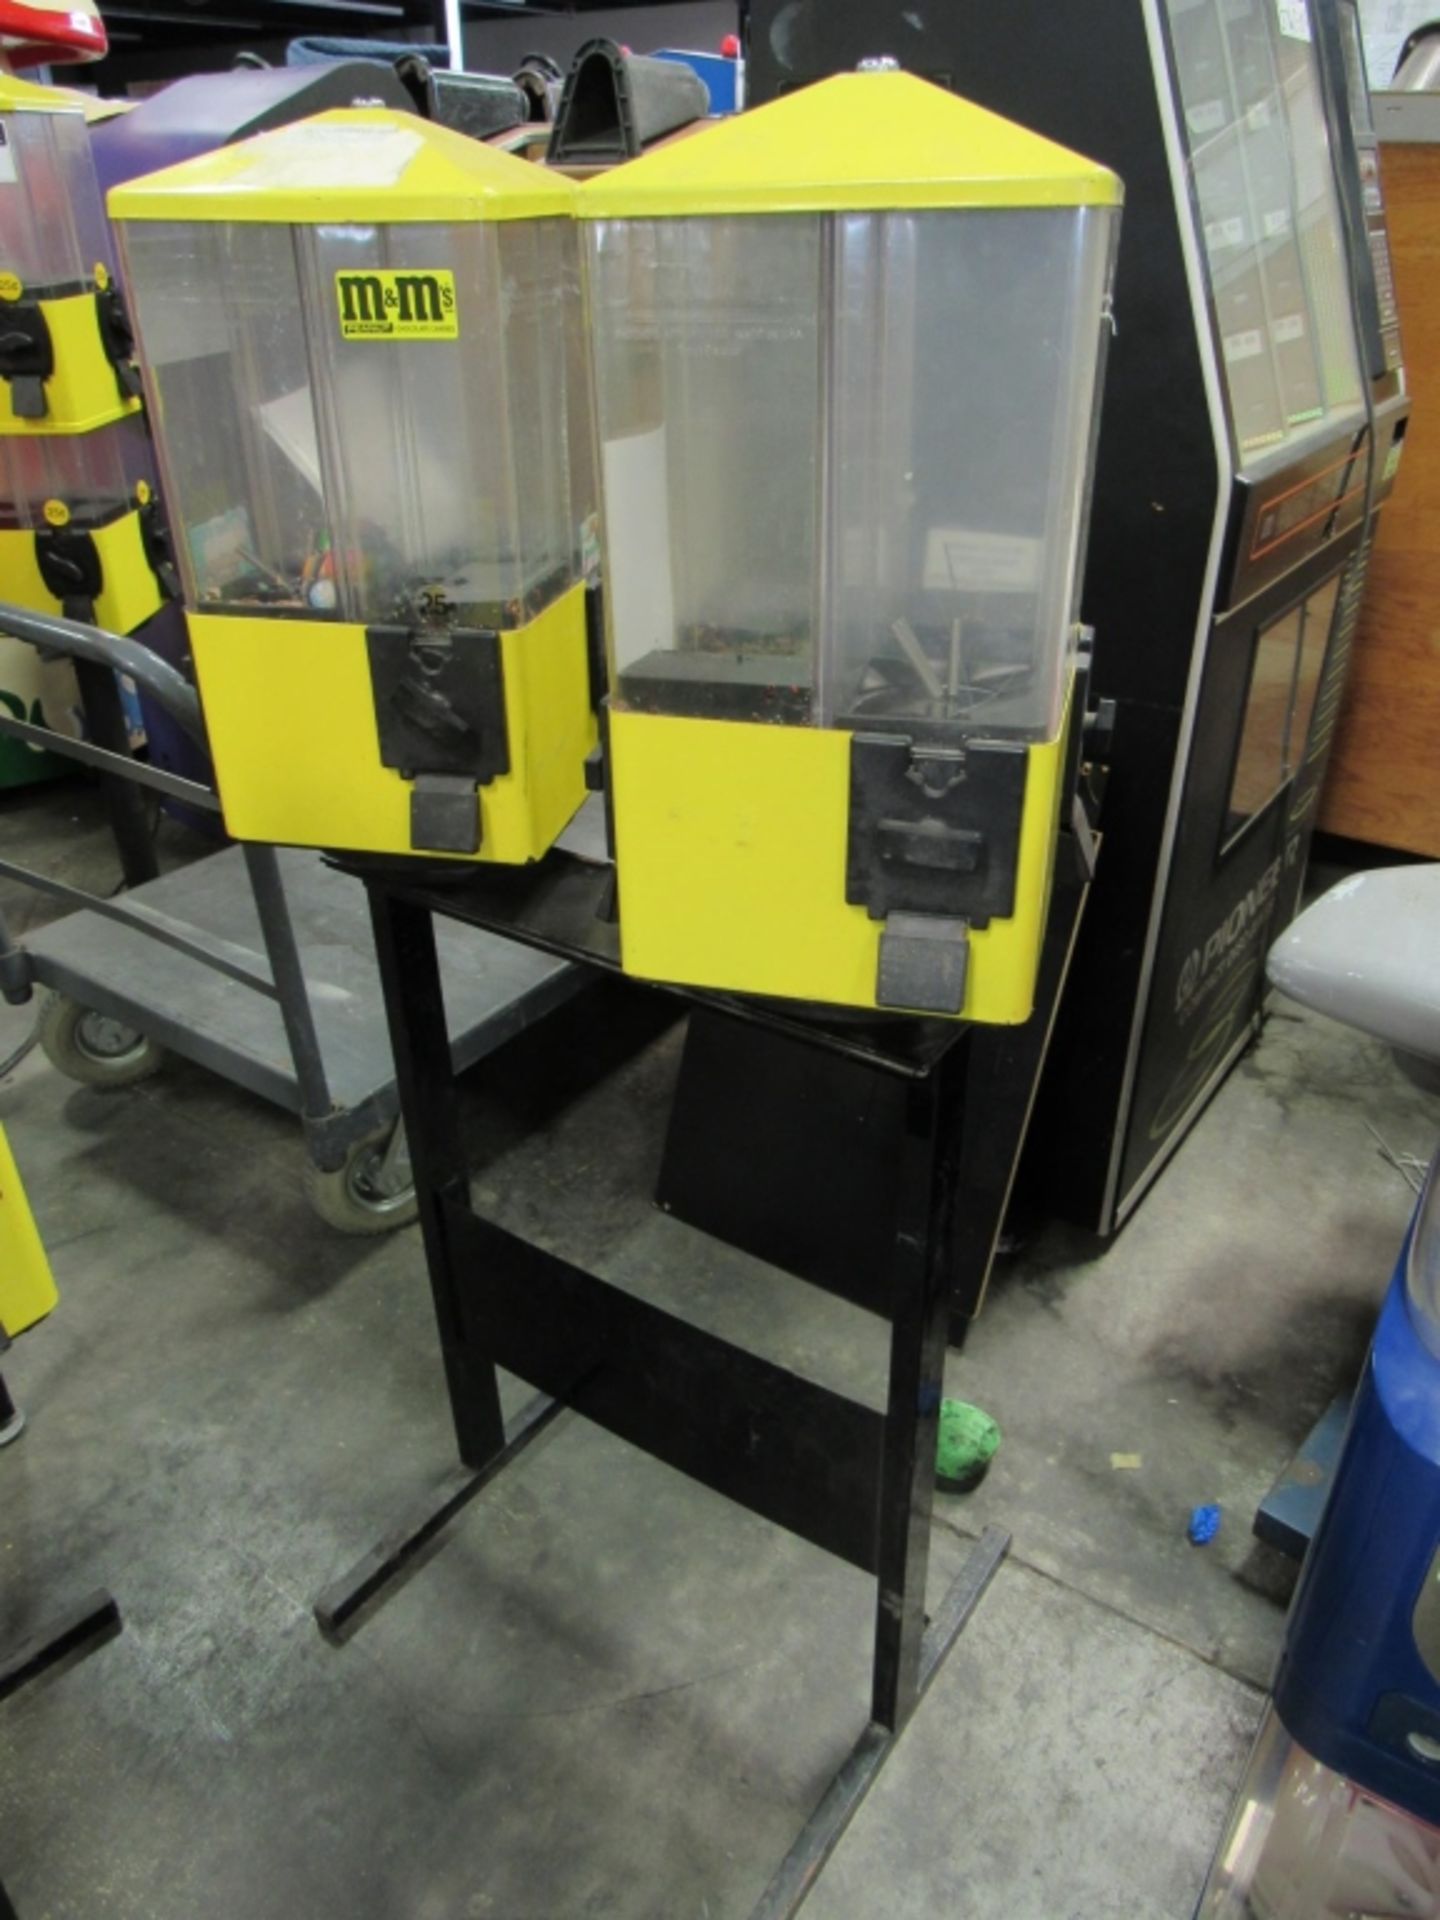 U-TURN DUAL HEAD BULK VENDING STAND LOT OF 2 Item is in used condition. Evidence of wear and